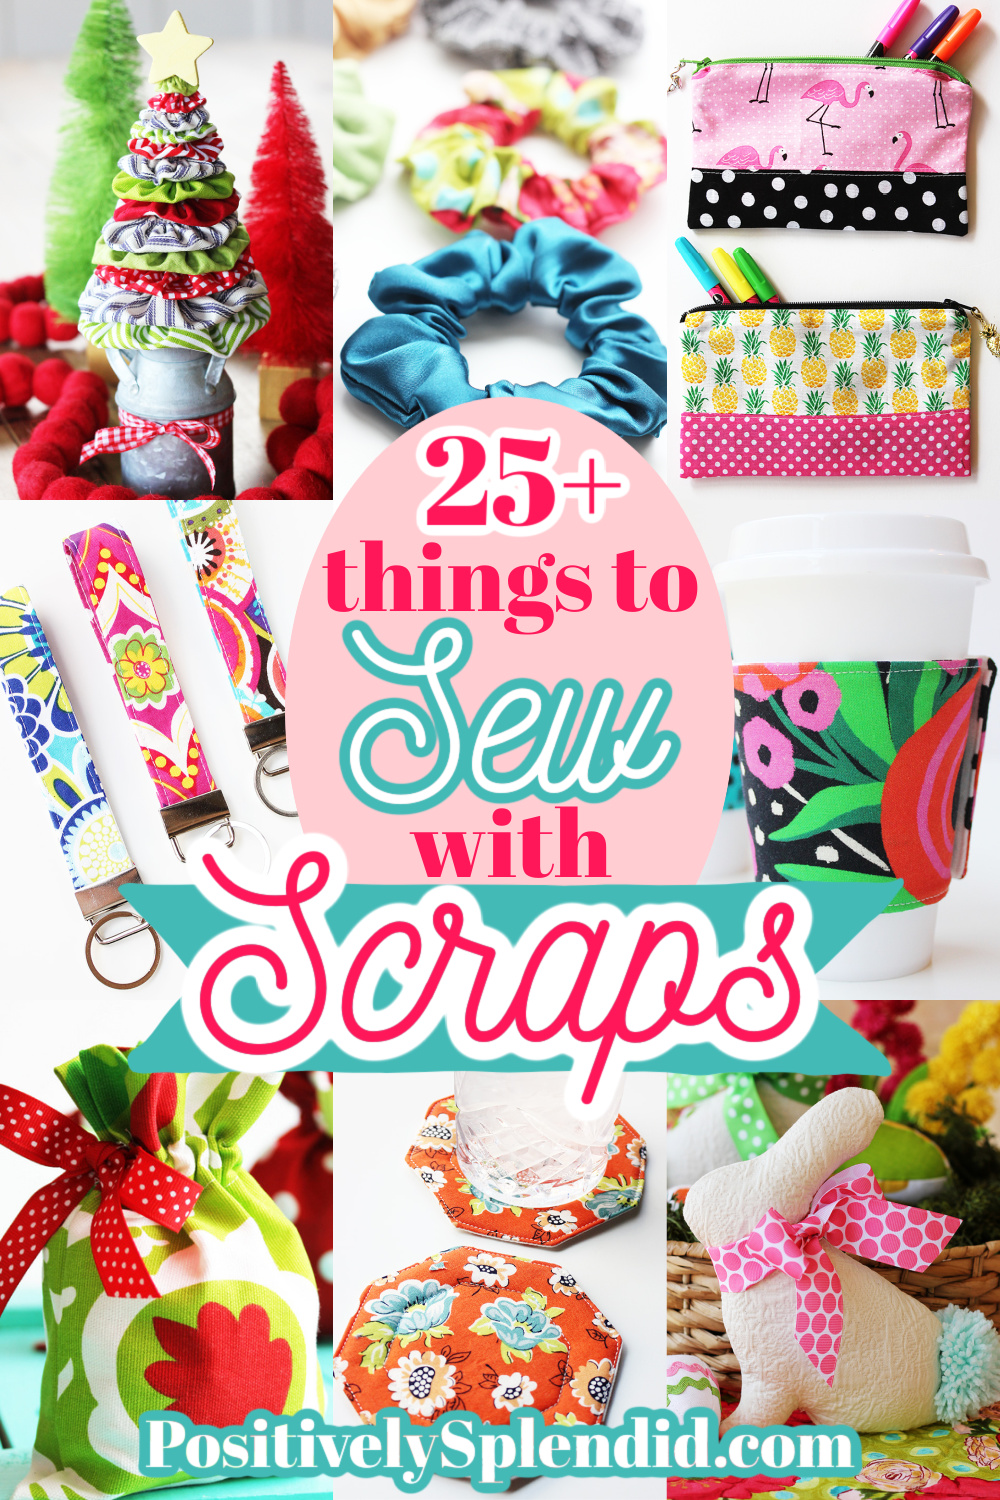 20+ Gifts to Sew with your Scrap Fabric